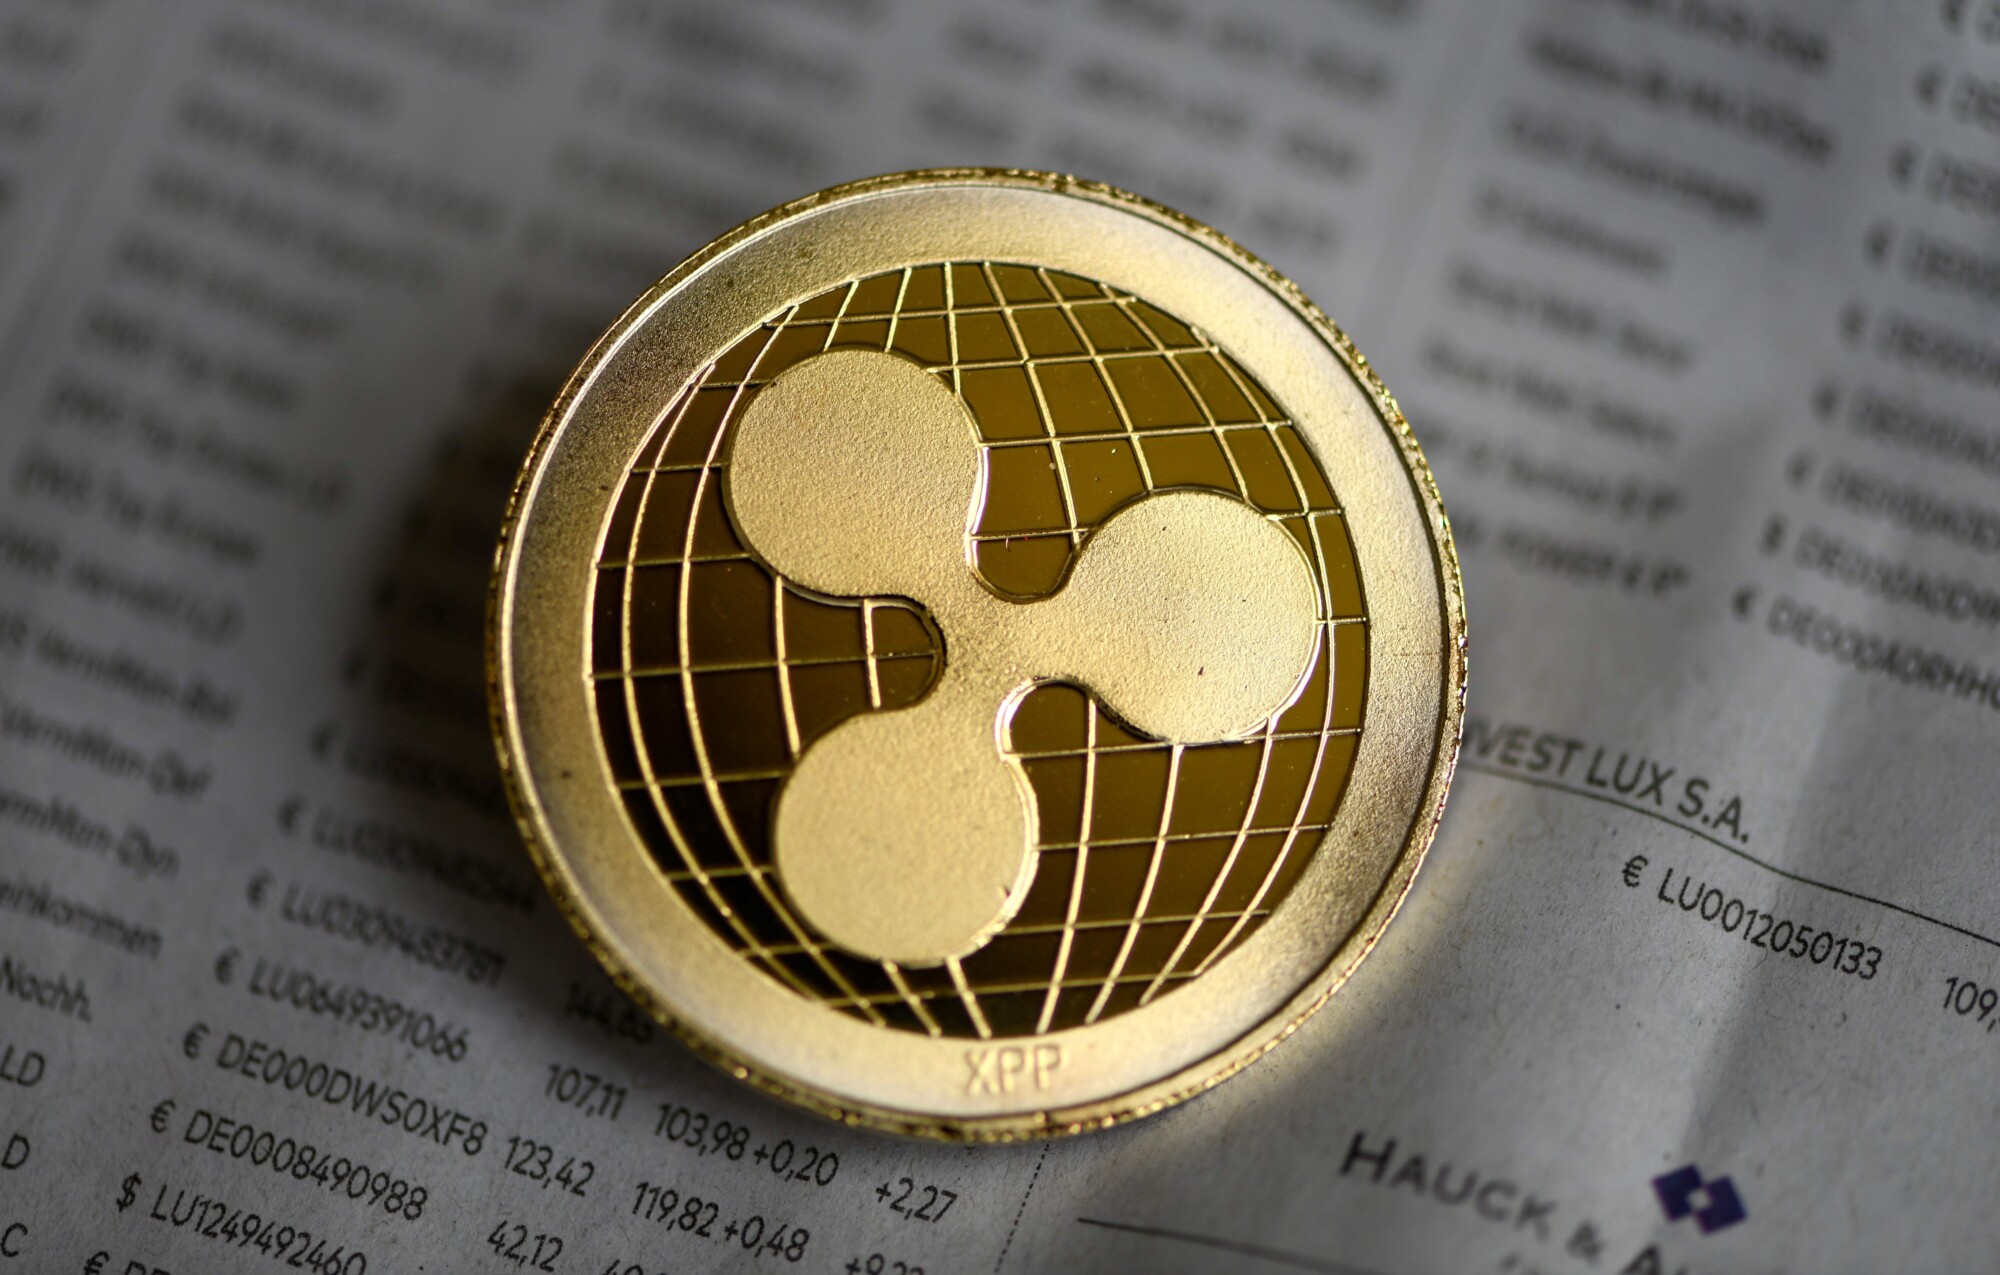 SEC Charges Cryptocurrency Firm Ripple